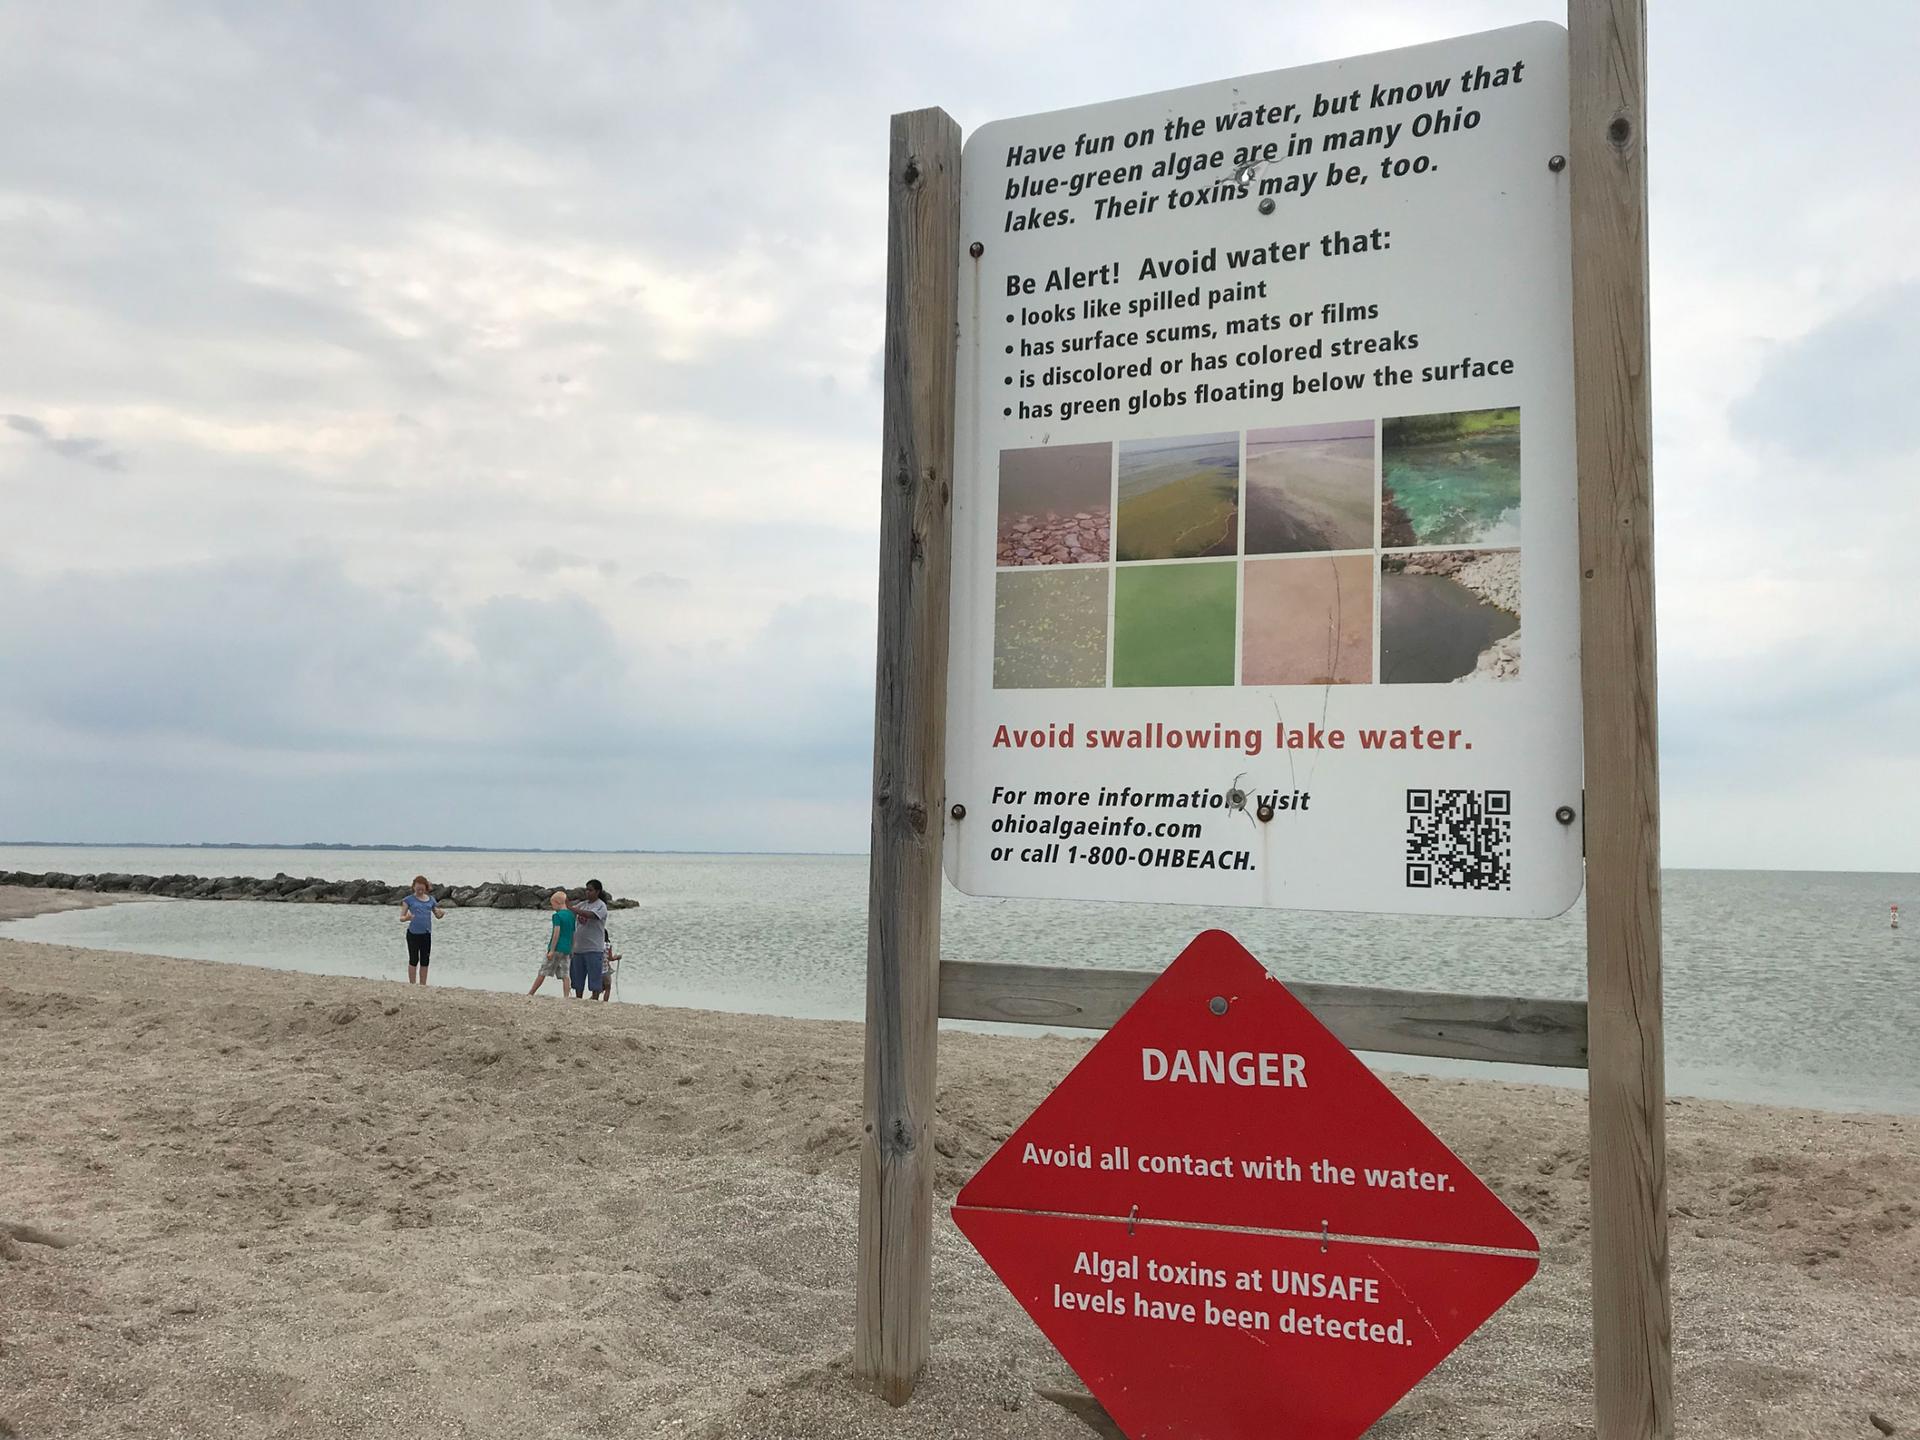 A small group of people are shown standing on a beach at the waters edge with a sign warning danger in the near ground.